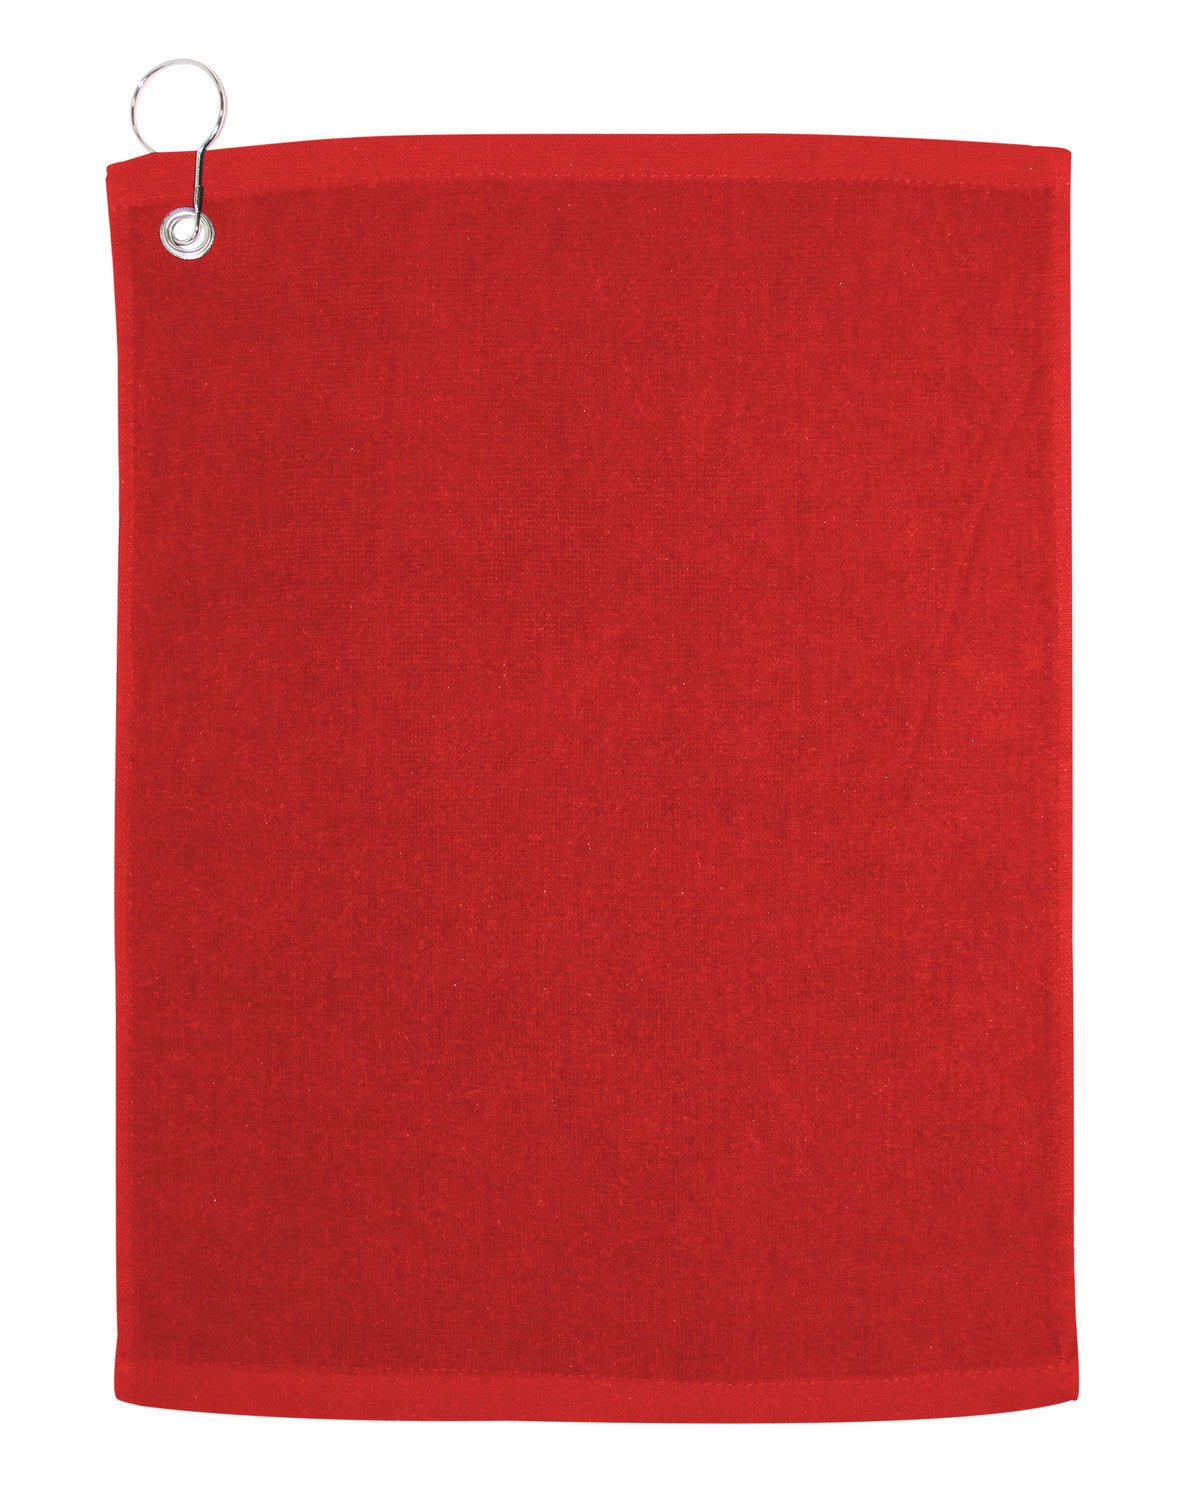 C1518GH-Carmel Towel Company-RED-Carmel Towel Company-Bags and Accessories-1